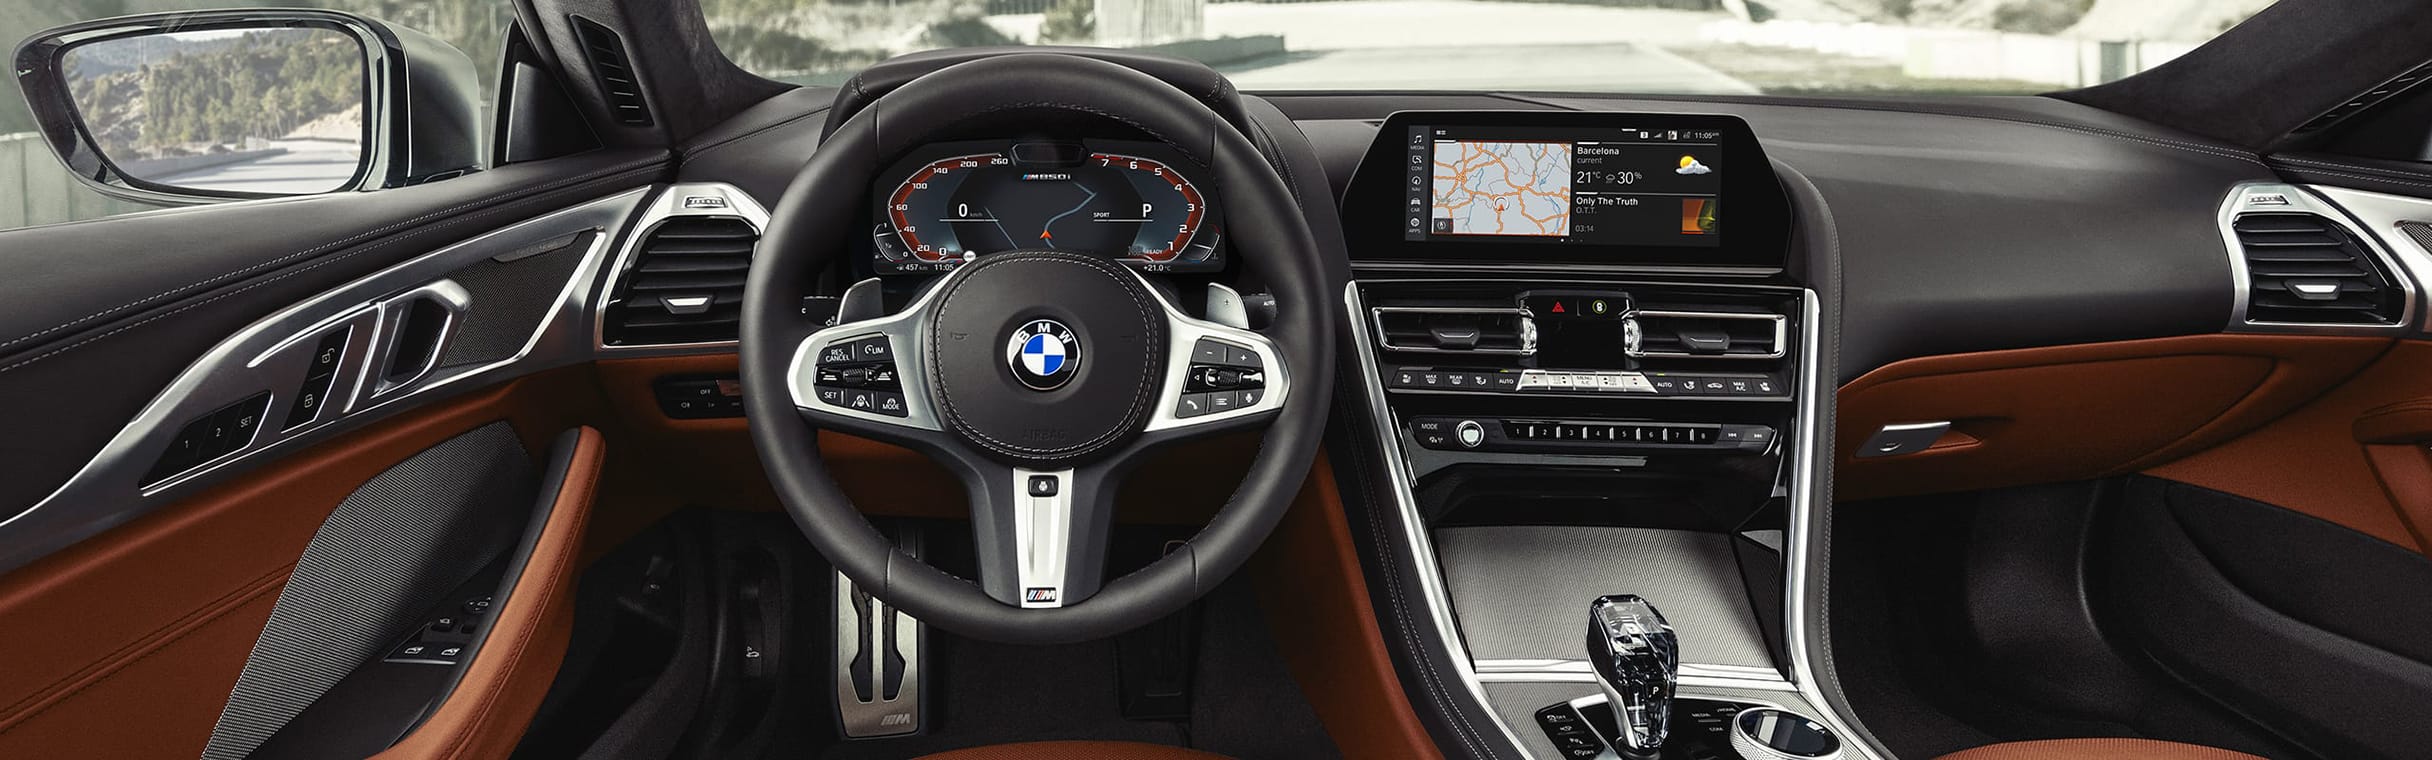 The interior of the BMW 8 Series.